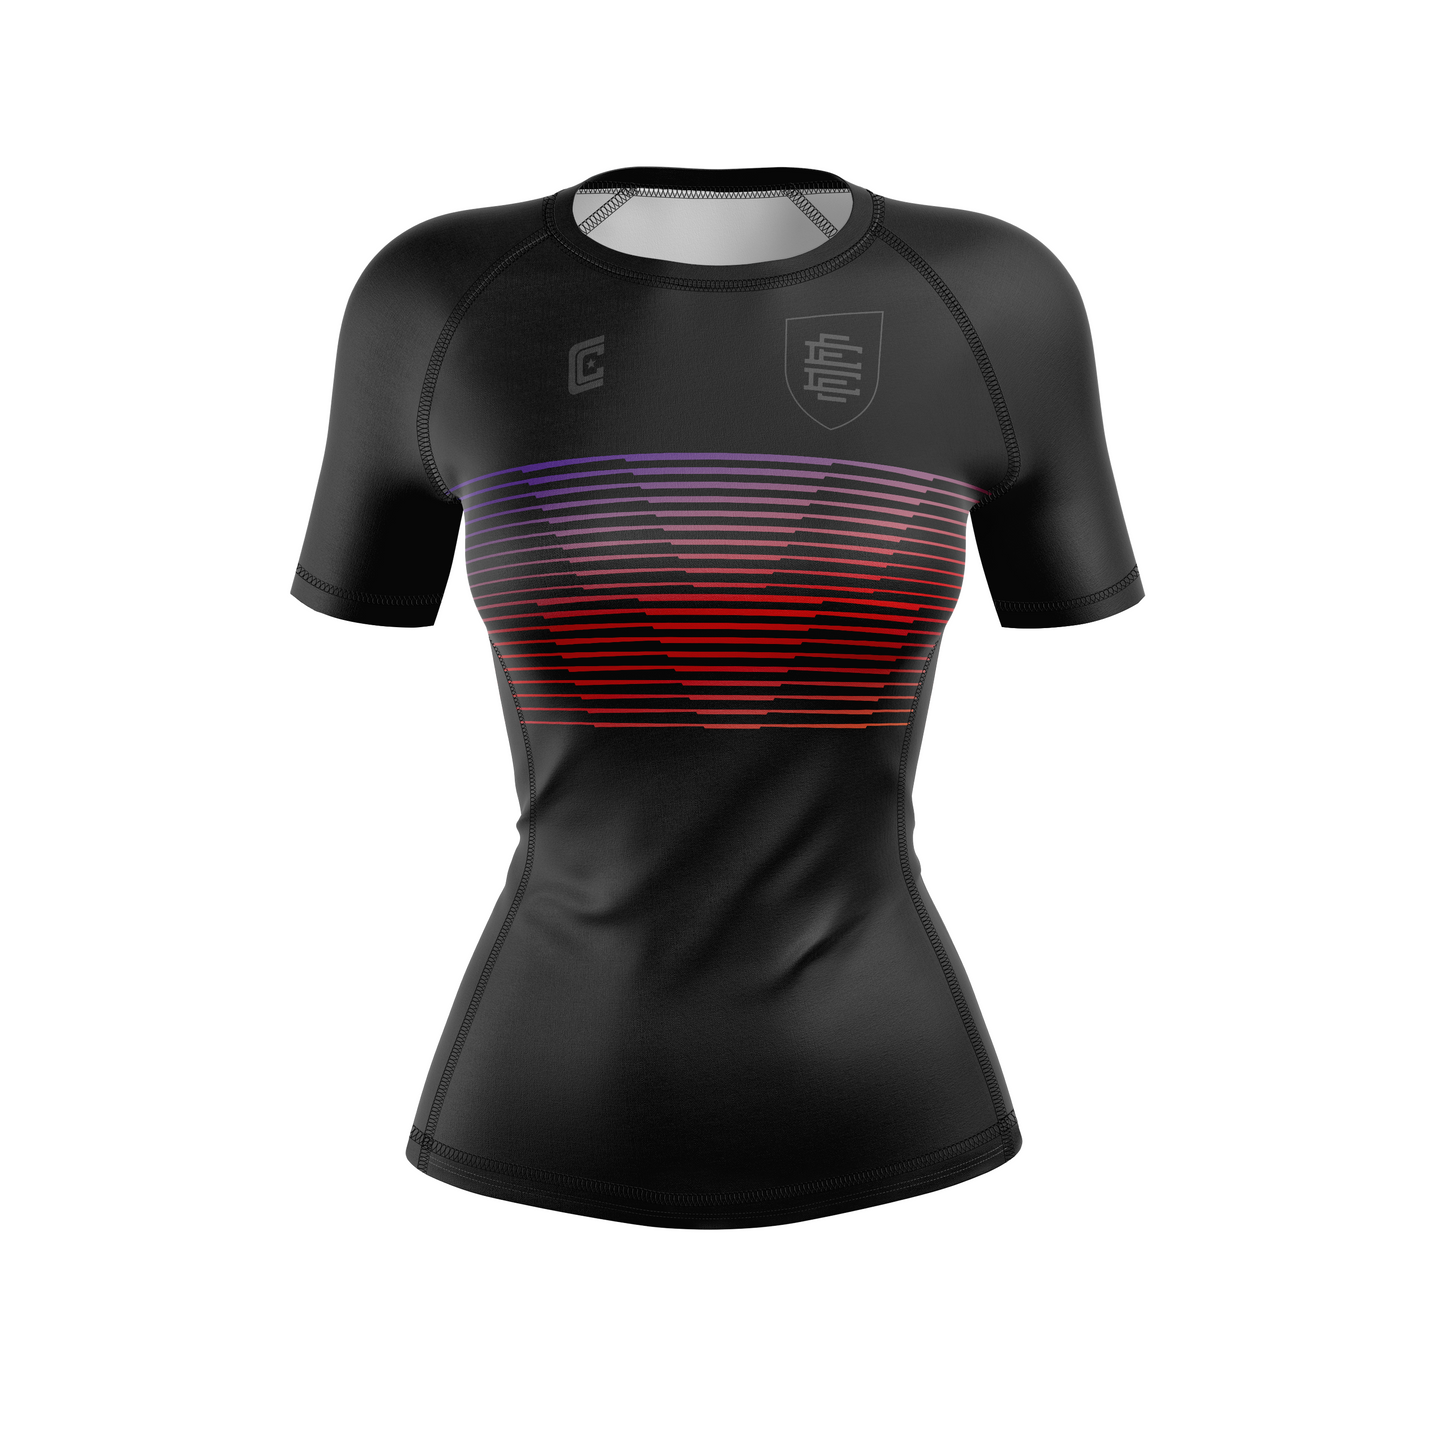 CCFC women's rash guard Reapers, black with purple and red